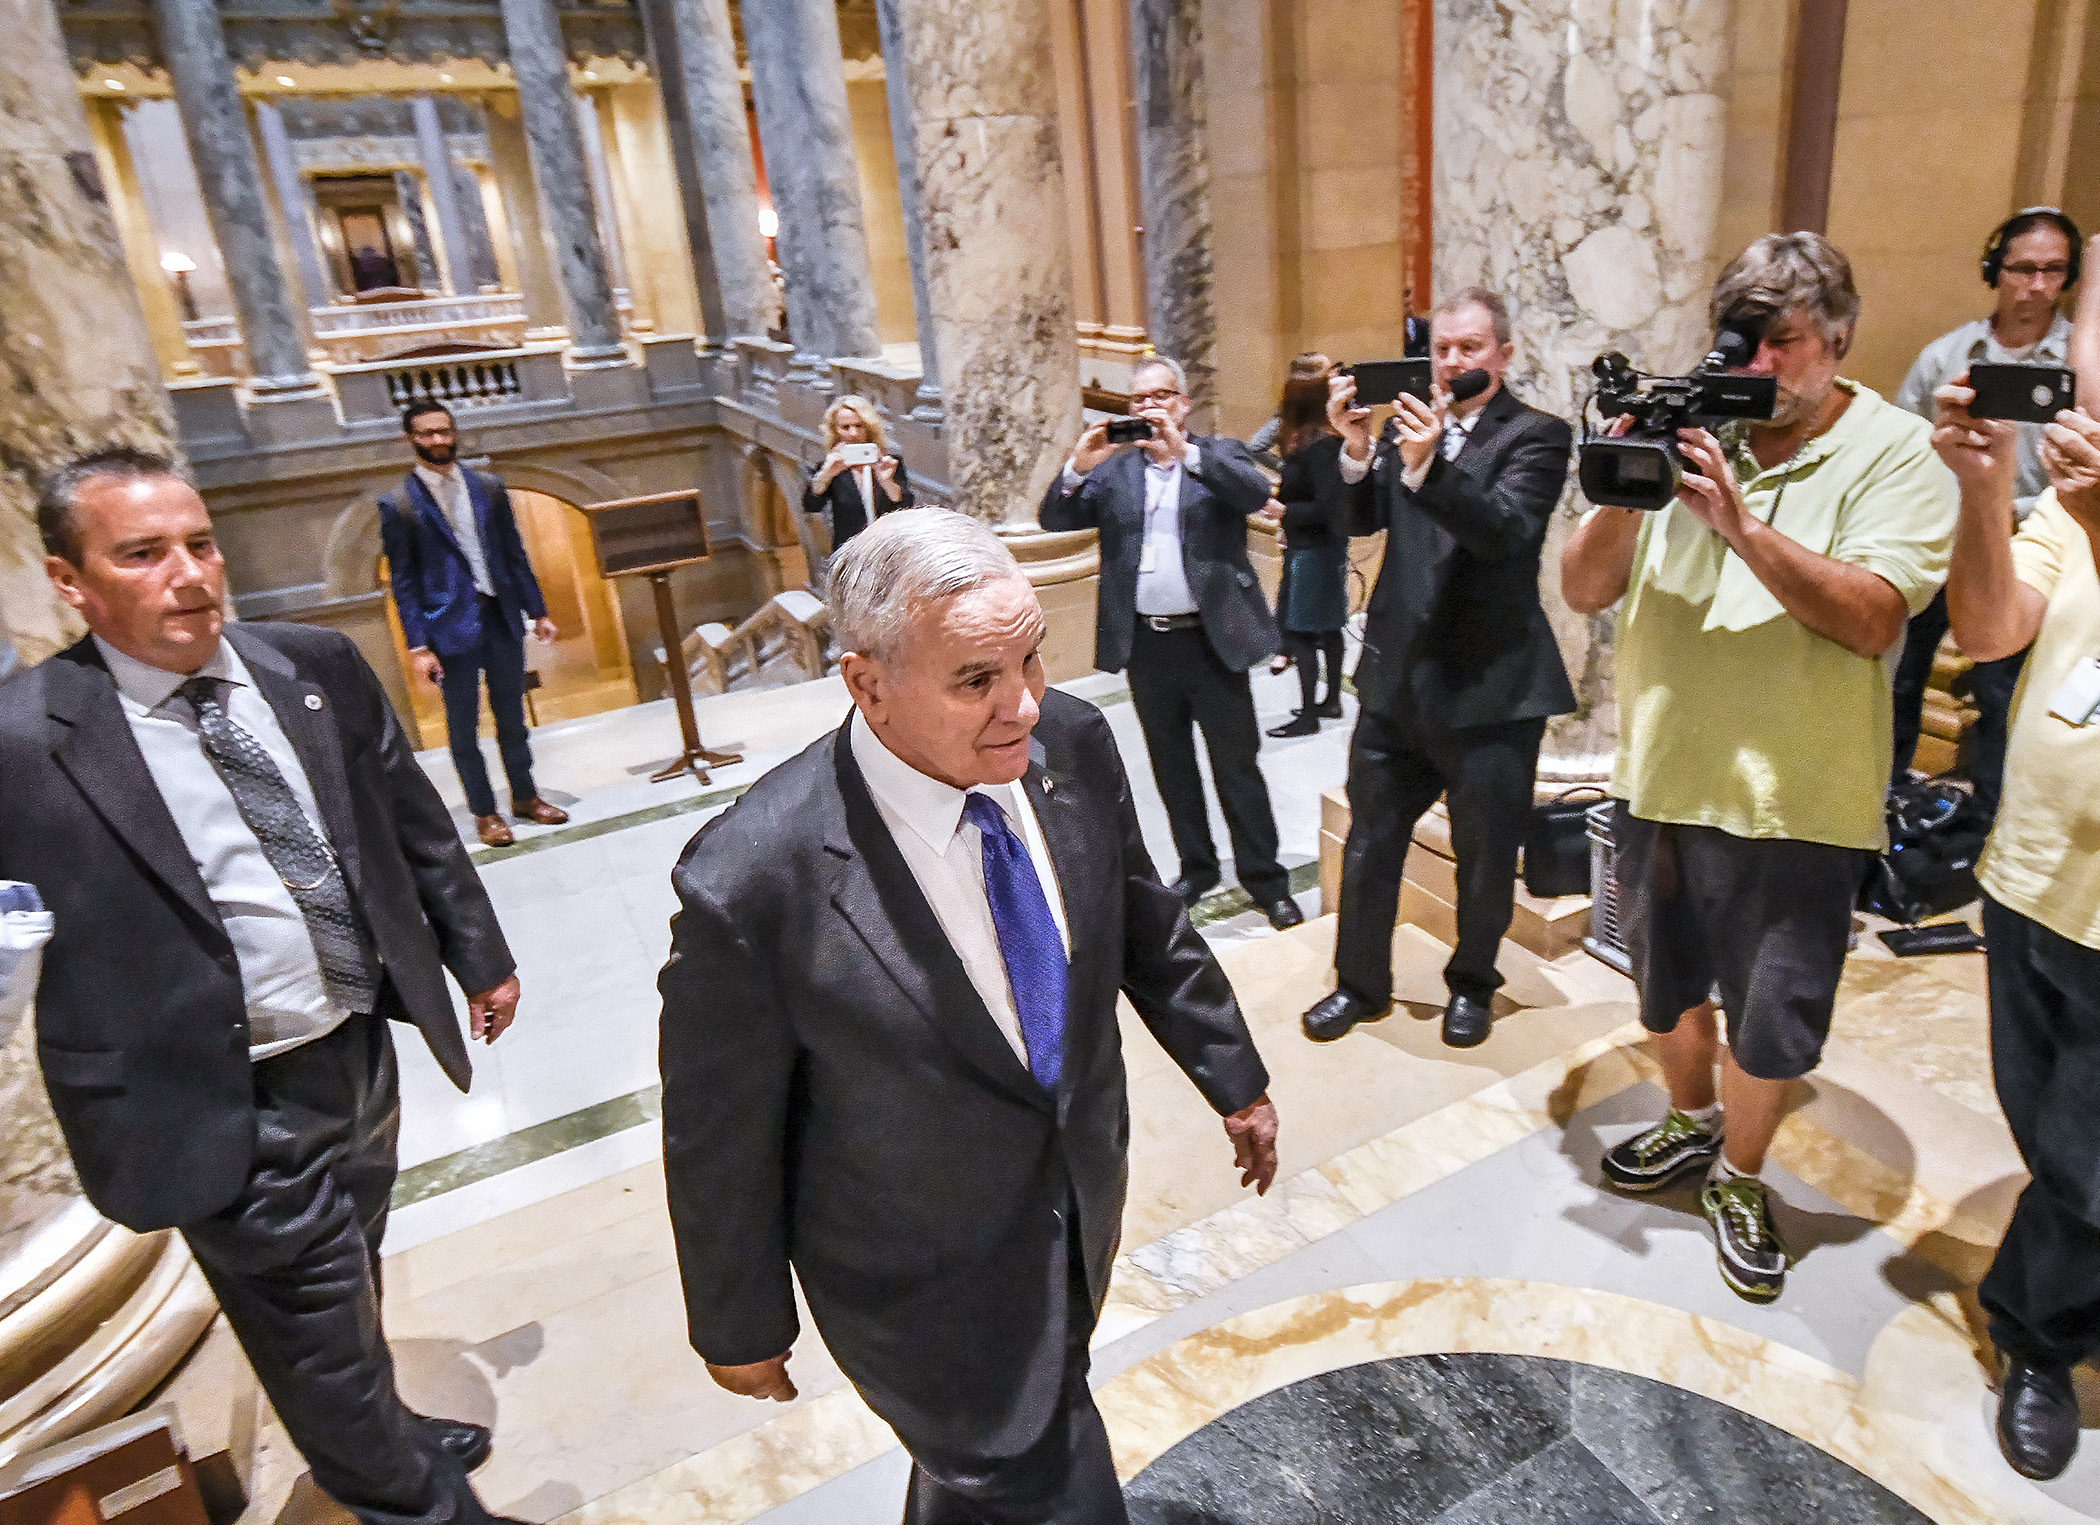 Gov. Mark Dayton enters the Minnesota Supreme Court chambers at the State Capitol on Monday for oral arguments in the Legislature's suit against him. Photo by Andrew VonBank